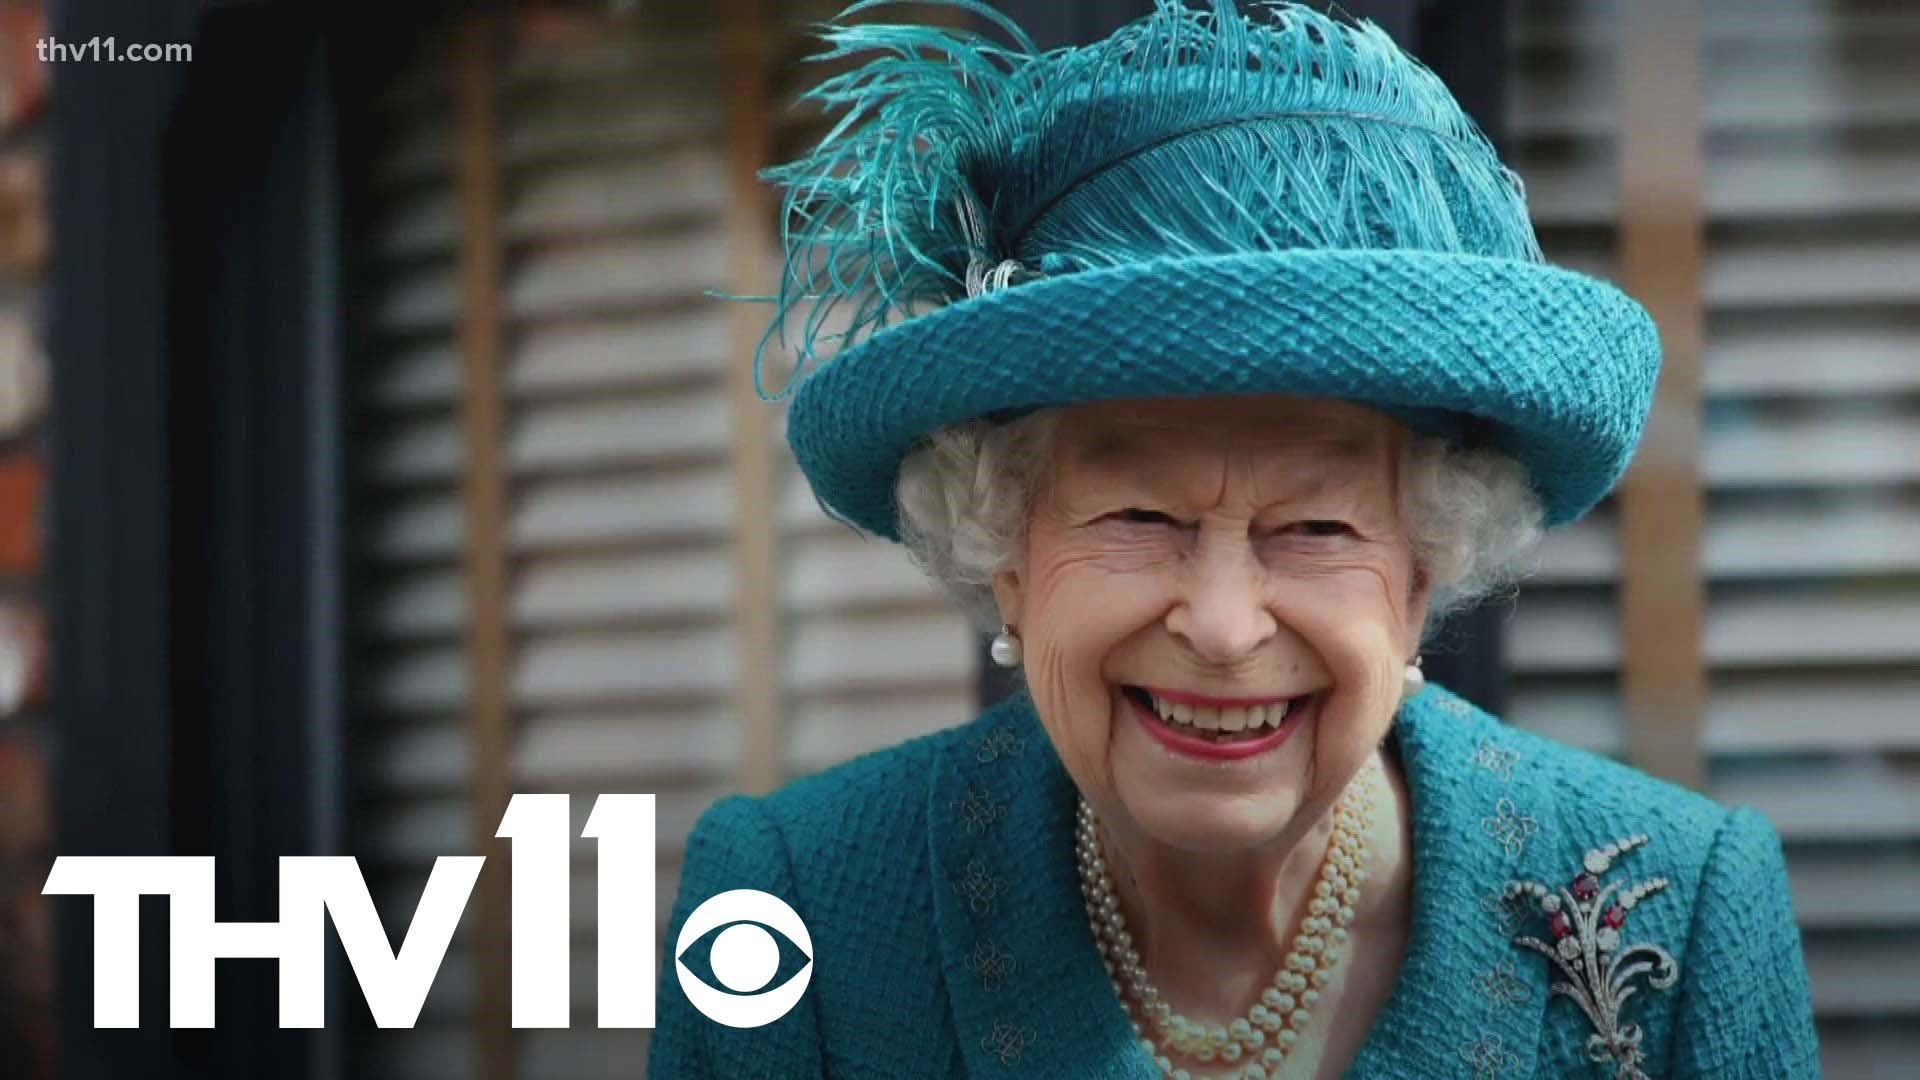 Millions in Britain are mourning the loss of Queen Elizabeth II, the monarch that reigned for over 70 years. The Queen's death has many around the world mourning.